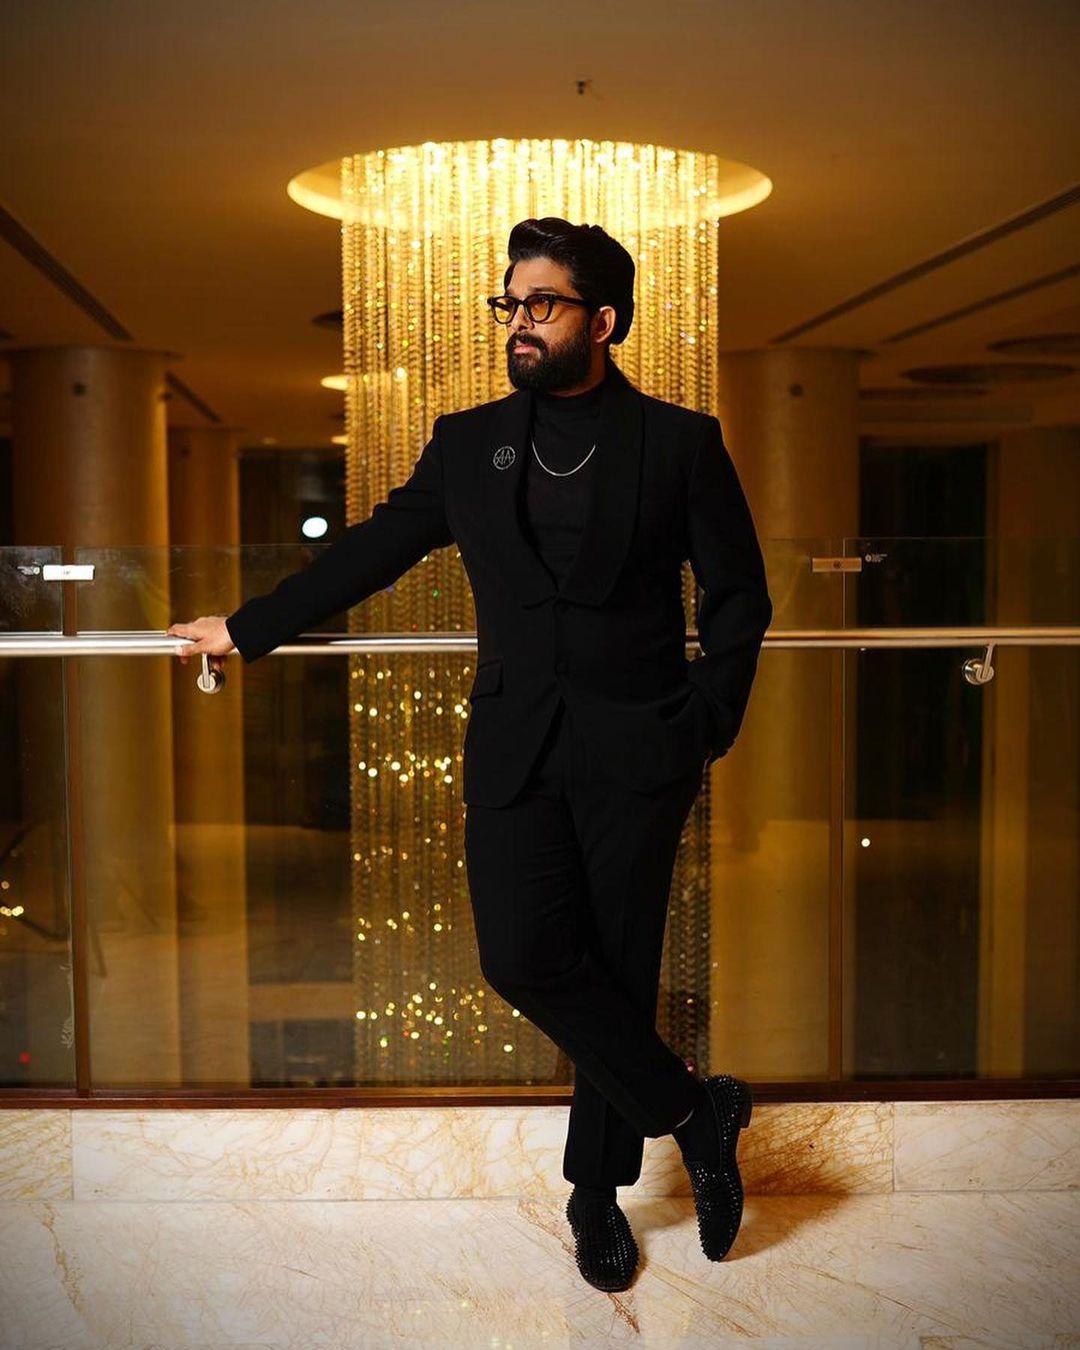 Allu Arjun is a master of styling when it comes to three-piece suits. Yet another look, and we are sold. The actor makes his fans drool as he dons a striking black three-piece suit. To accessorize the appearance, he added a gold chain and a stylish brooch